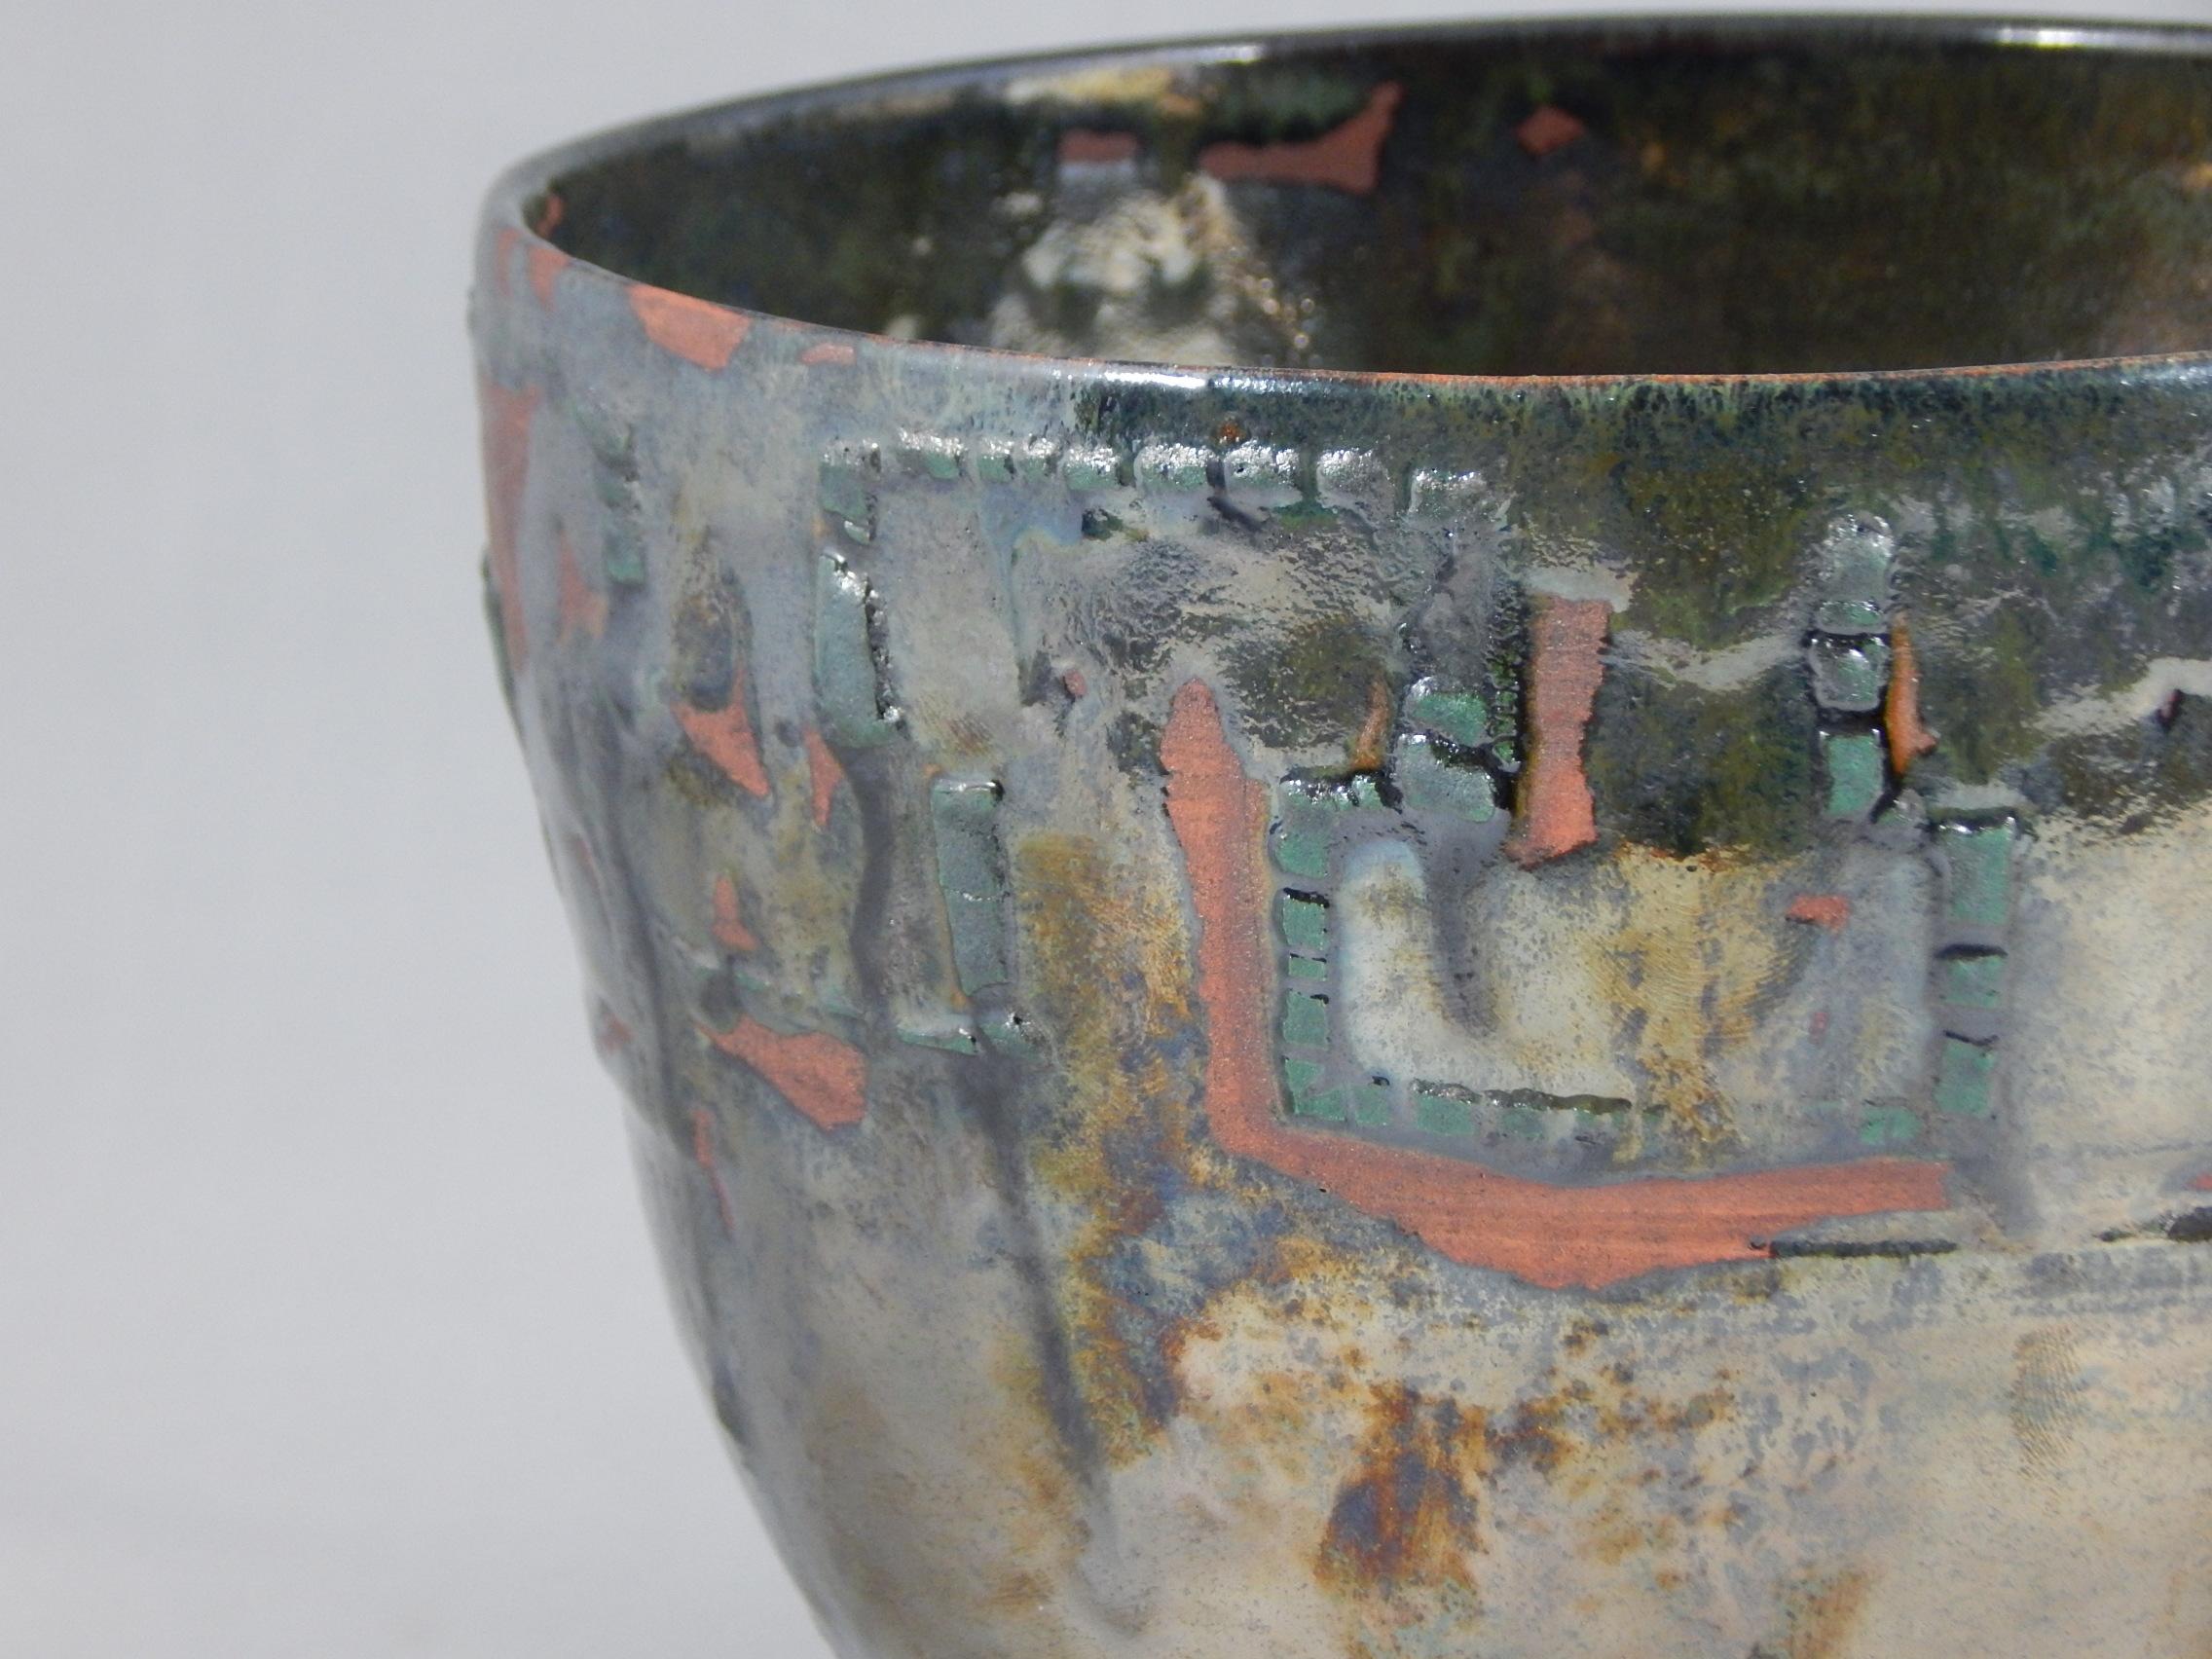 Seelbach wheel thrown earthenware vessel by ceramicist Andrew Wilder.
This is a one of a kind object made in the ancient way- by hand in a small artisanal pottery. In this series Wilder explores the application of lichen under glazes to achieve